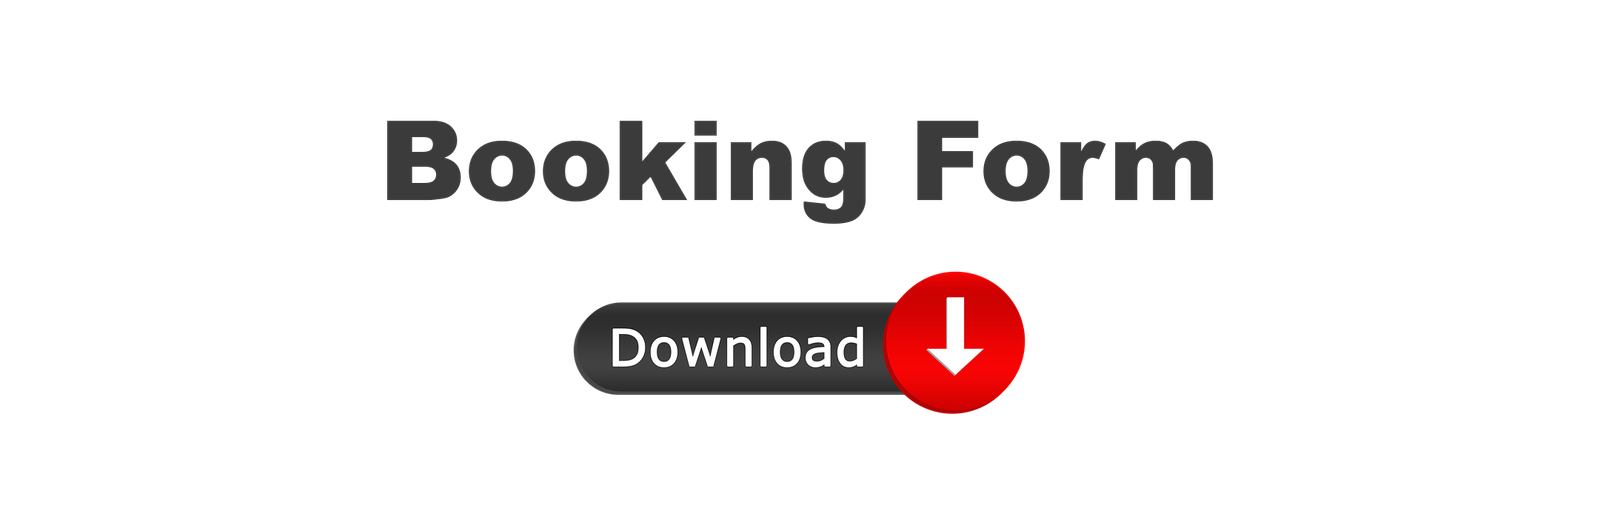 Download Button for Booking Form